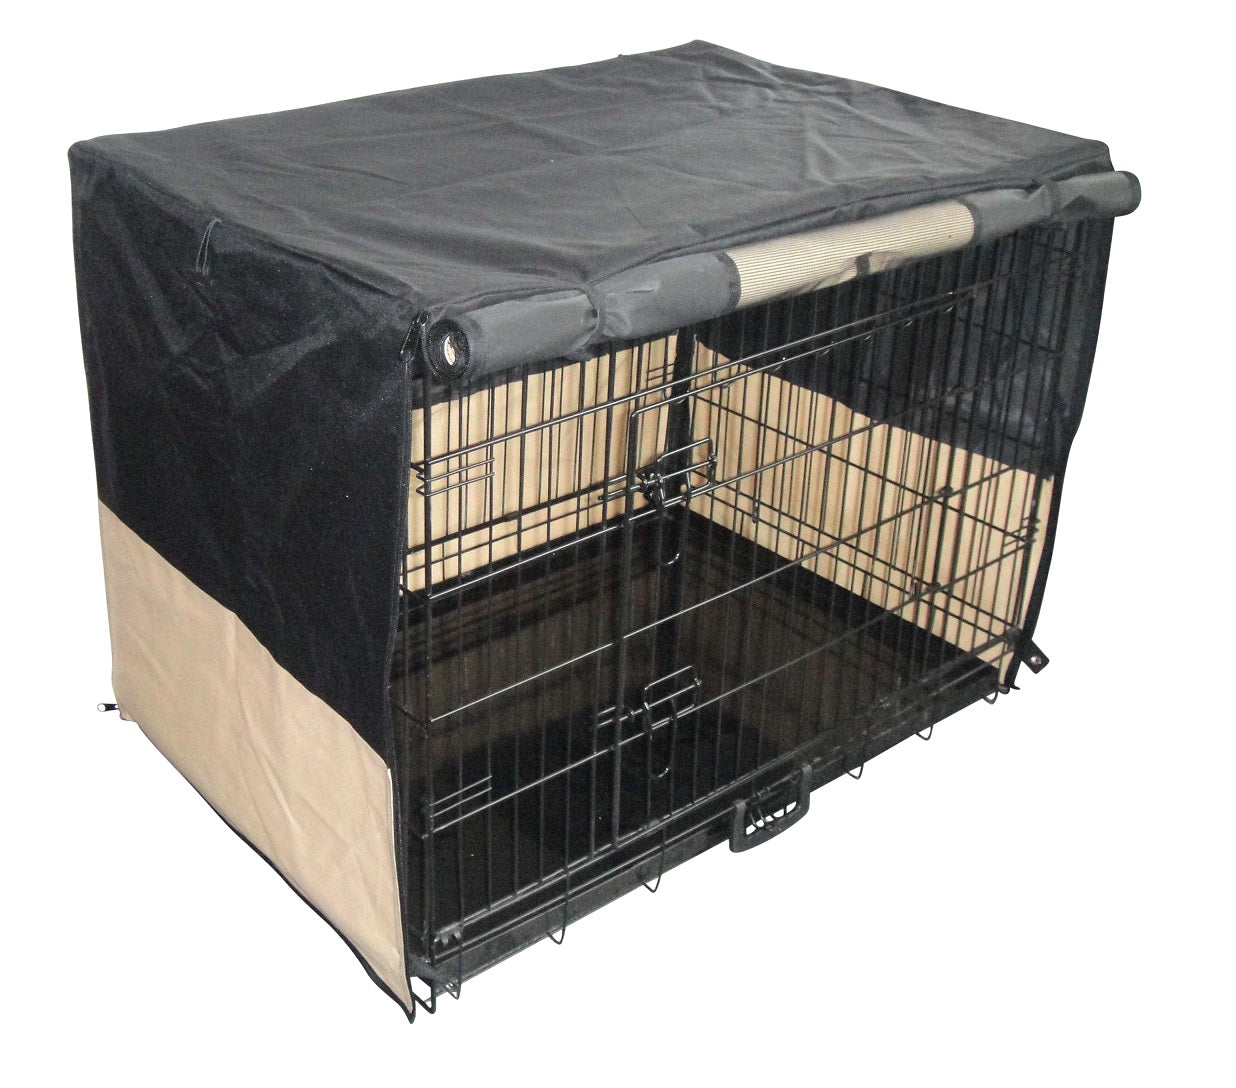 36" Pet Dog Crate with Waterproof Cover - image2